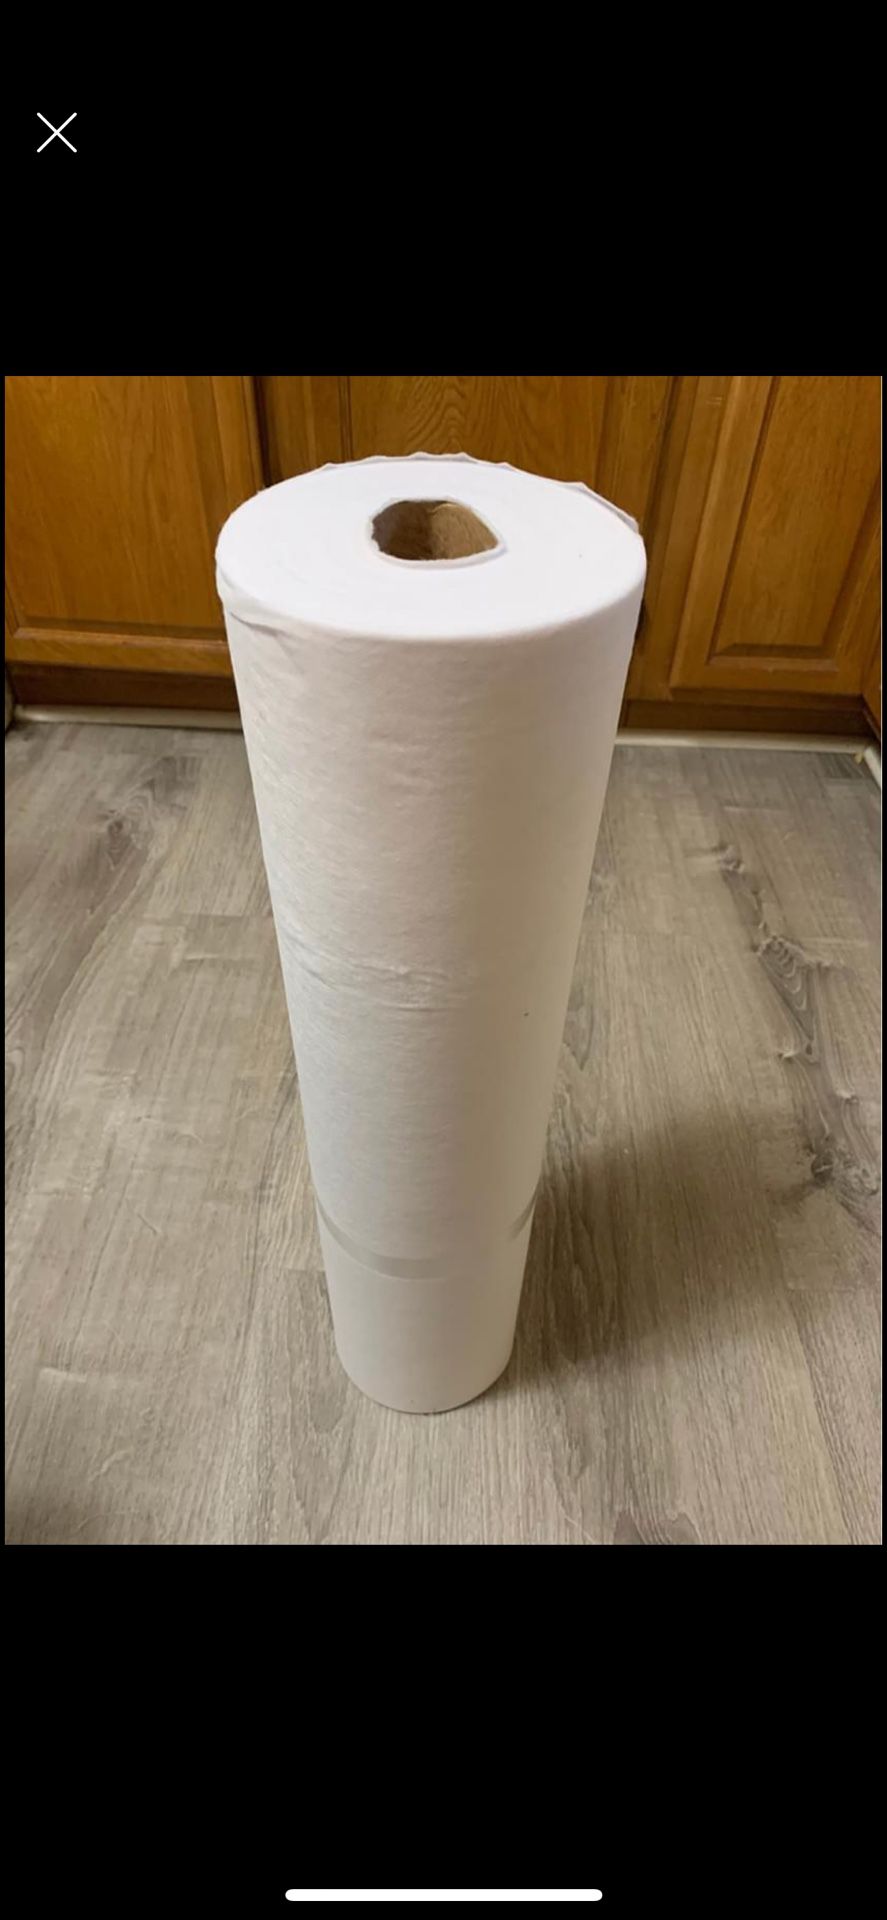 Non woven filter for mask 130 yards roll for $80 stop paying 2.99 per yard